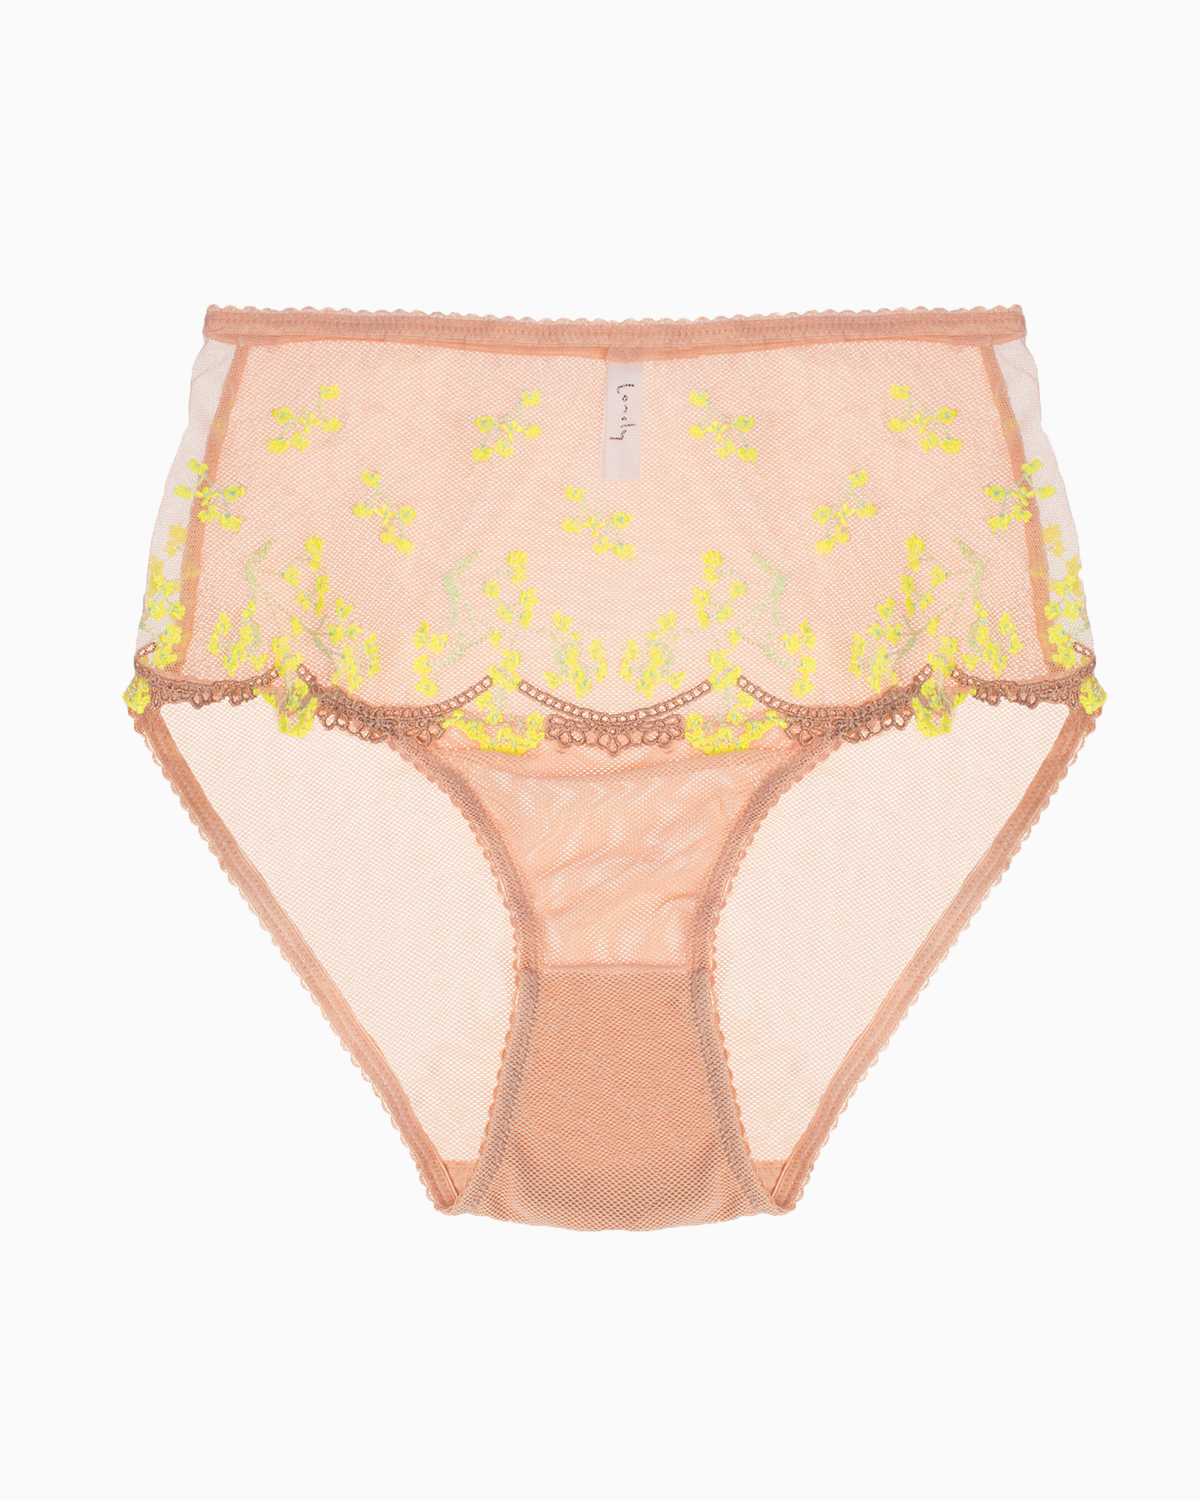 Lonely high-waisted briefs, $75